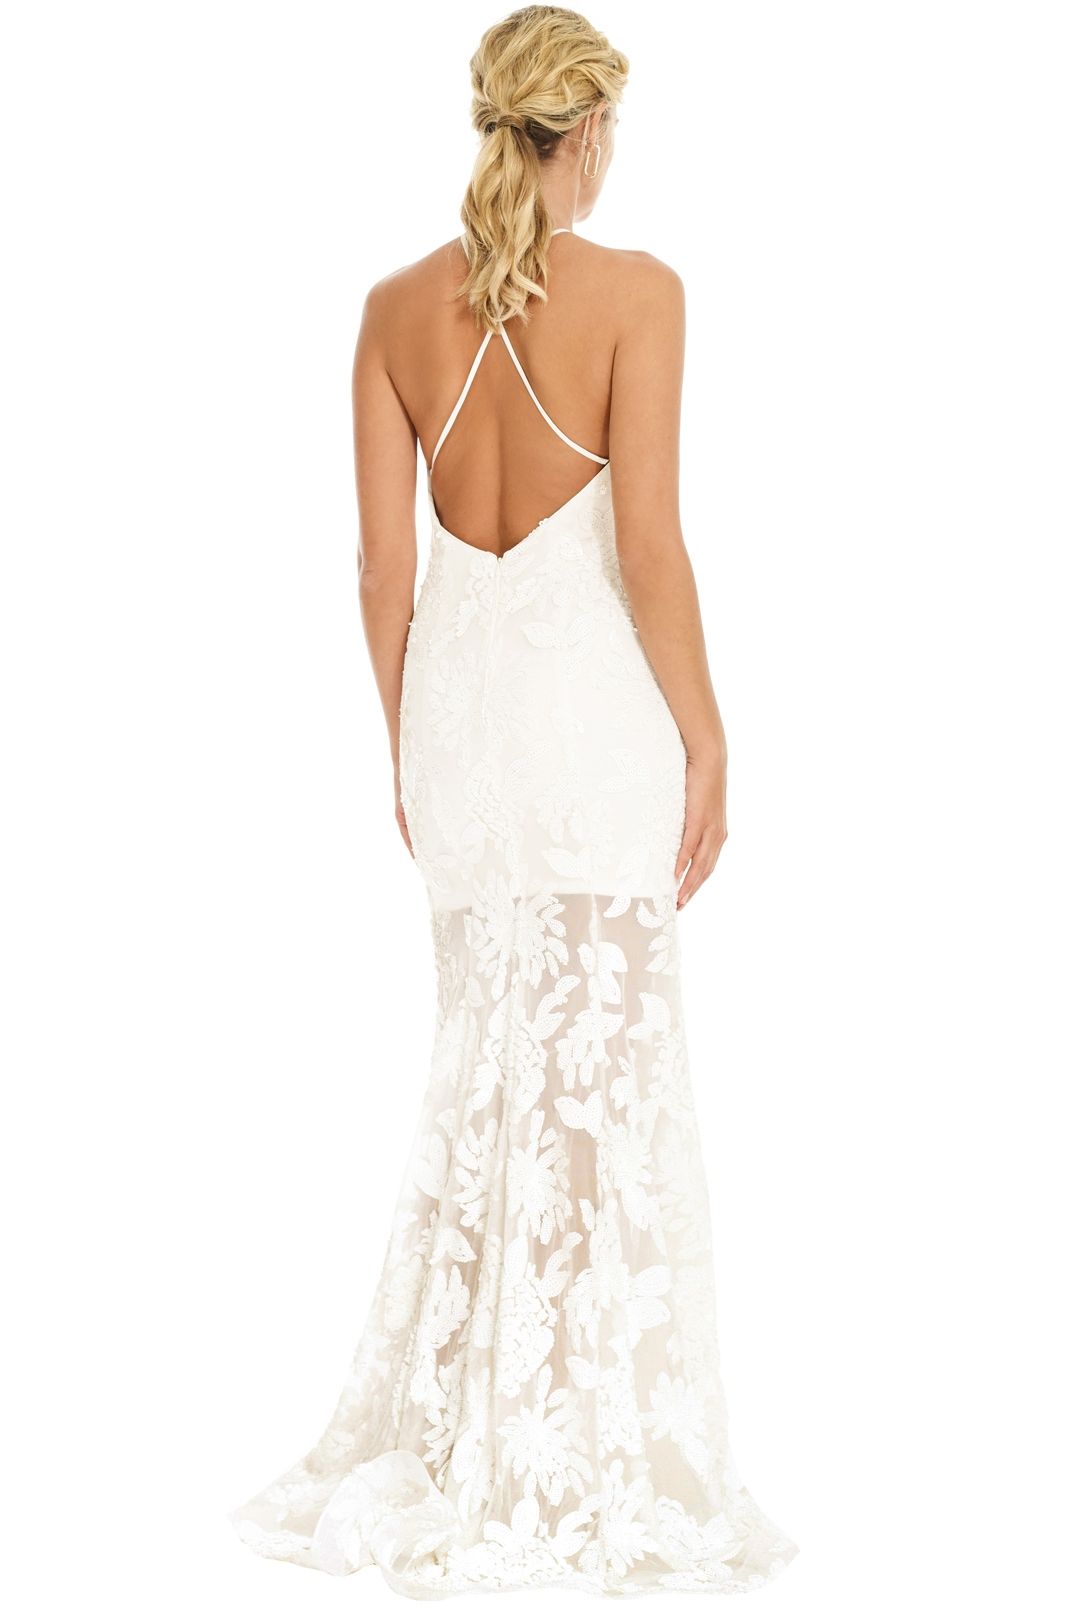 Tinaholy - White Halter Gown - Back